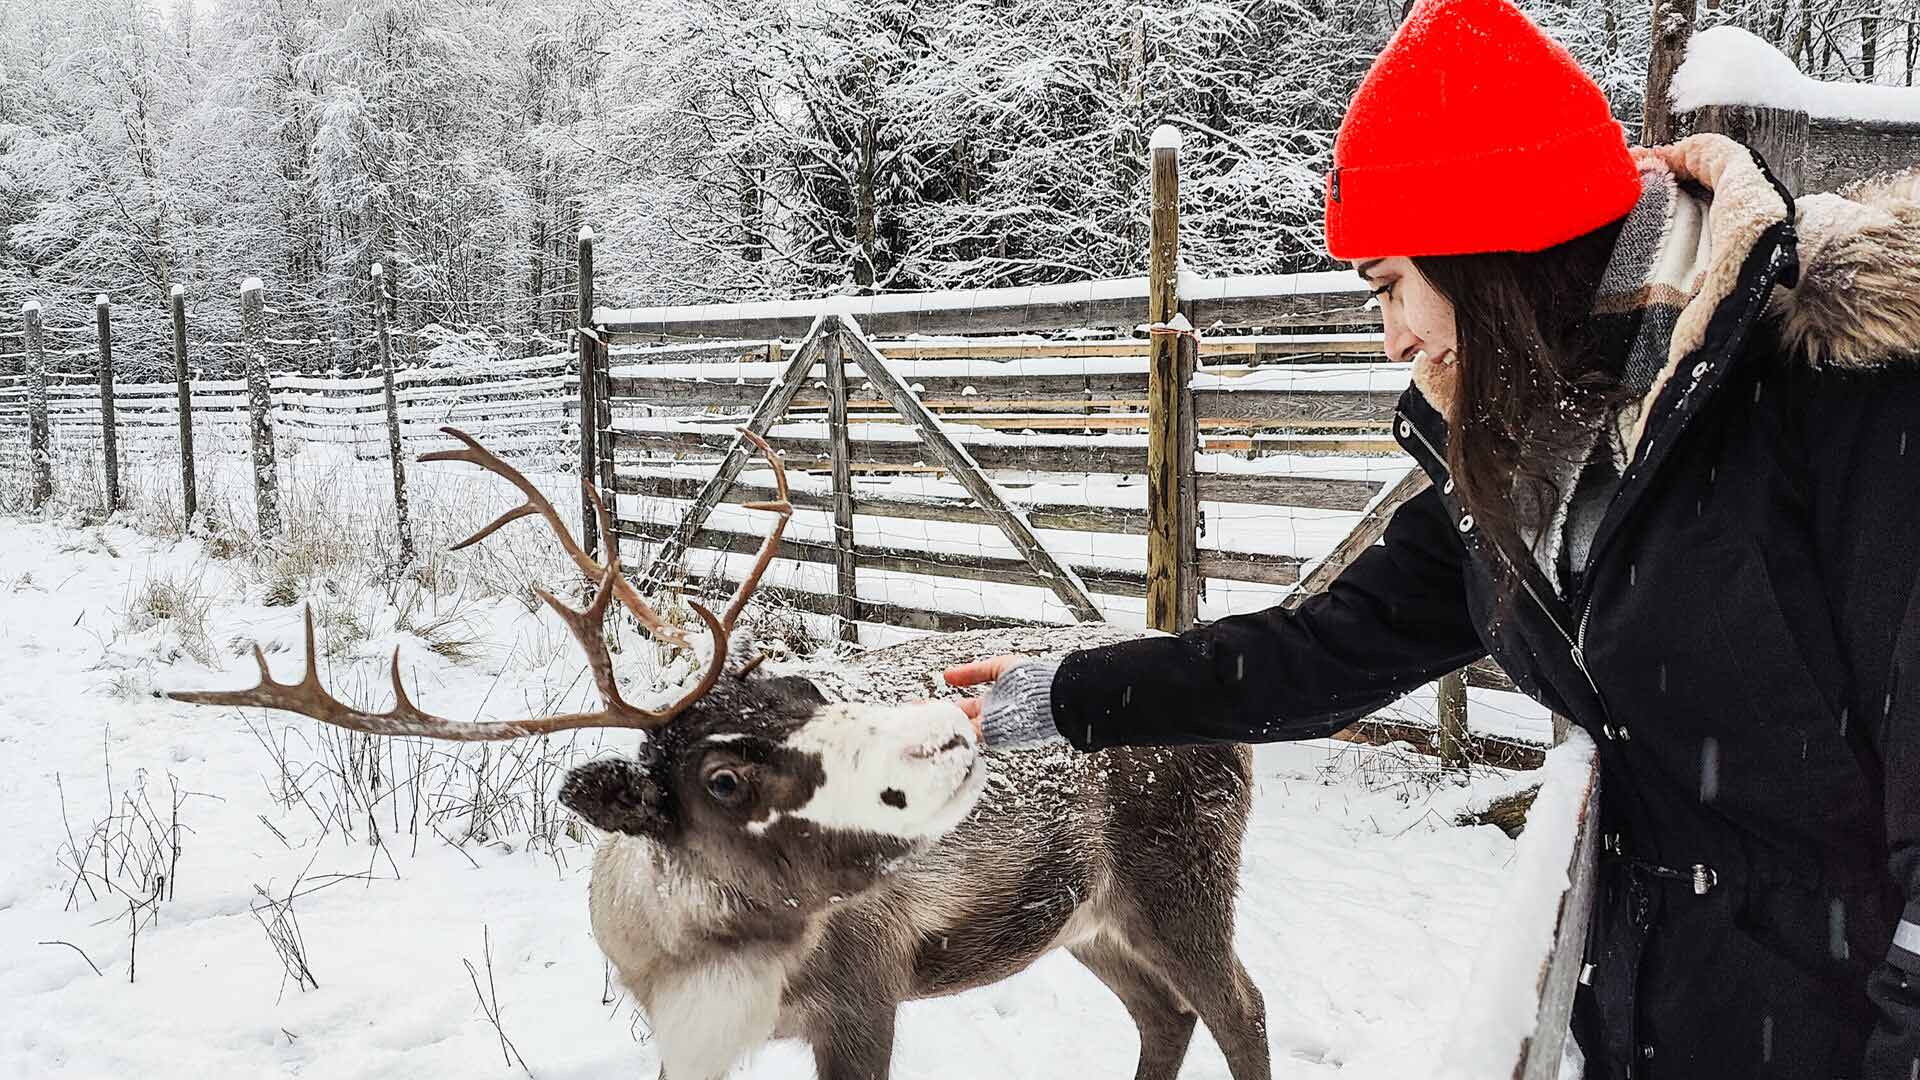 A visitor petting a friendly reindeer in the snow ©Arctic SnowHotel & Glass Igloos